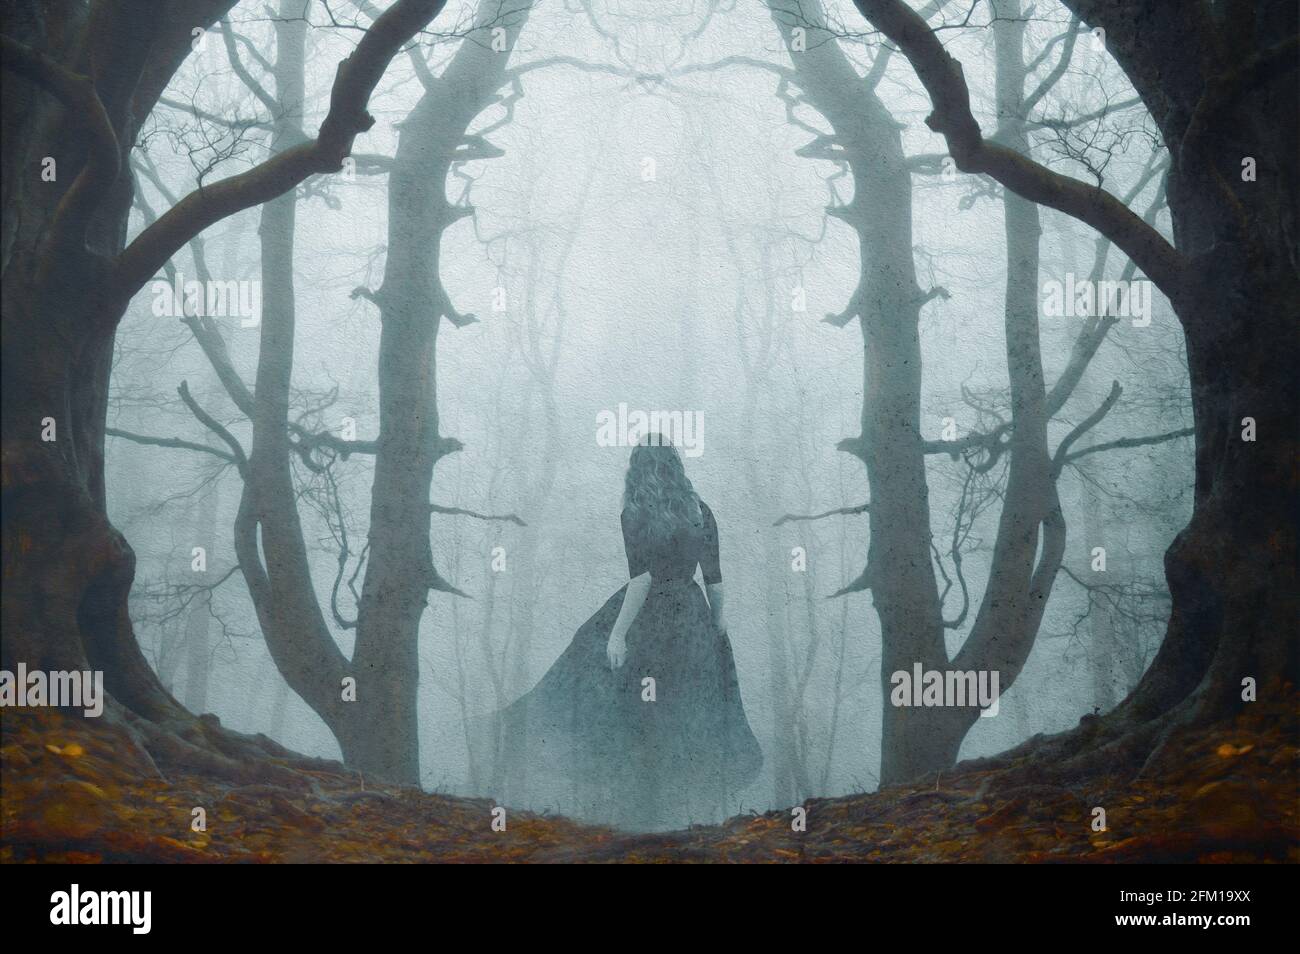 A supernatural concept of a ghostly woman wearing a long dress, walking through a spooky, foggy forest in winter. With a grunge, vintage edit. Stock Photo